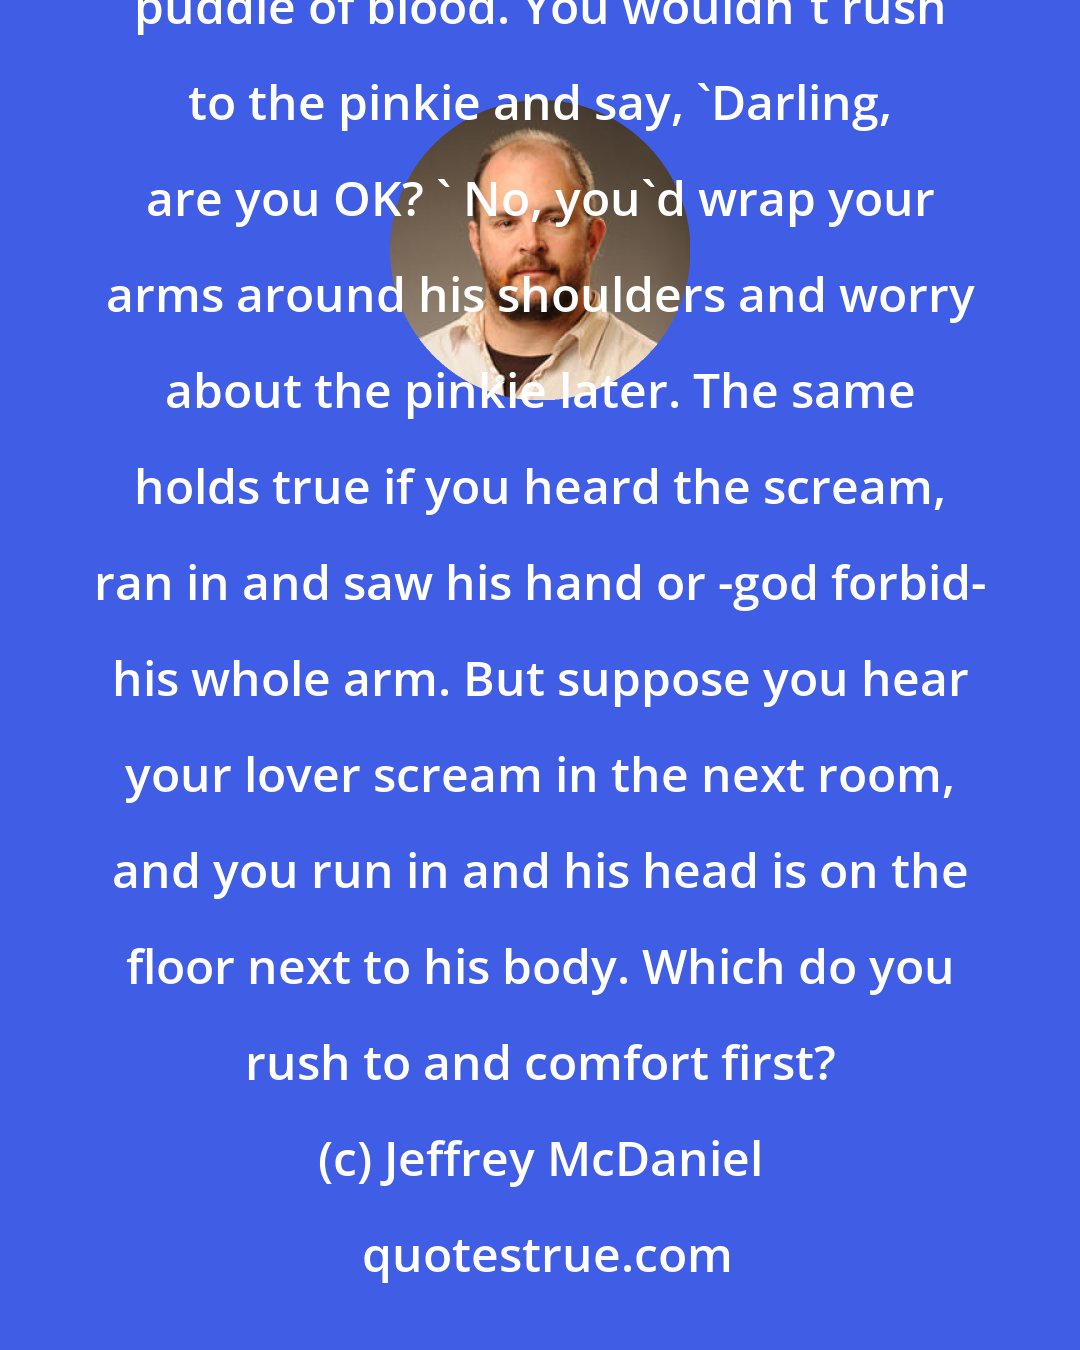 Jeffrey McDaniel: If you heard your lover scream in the next room and you ran in and saw his pinkie on the floor, in a small puddle of blood. You wouldn't rush to the pinkie and say, 'Darling, are you OK? ' No, you'd wrap your arms around his shoulders and worry about the pinkie later. The same holds true if you heard the scream, ran in and saw his hand or -god forbid- his whole arm. But suppose you hear your lover scream in the next room, and you run in and his head is on the floor next to his body. Which do you rush to and comfort first?